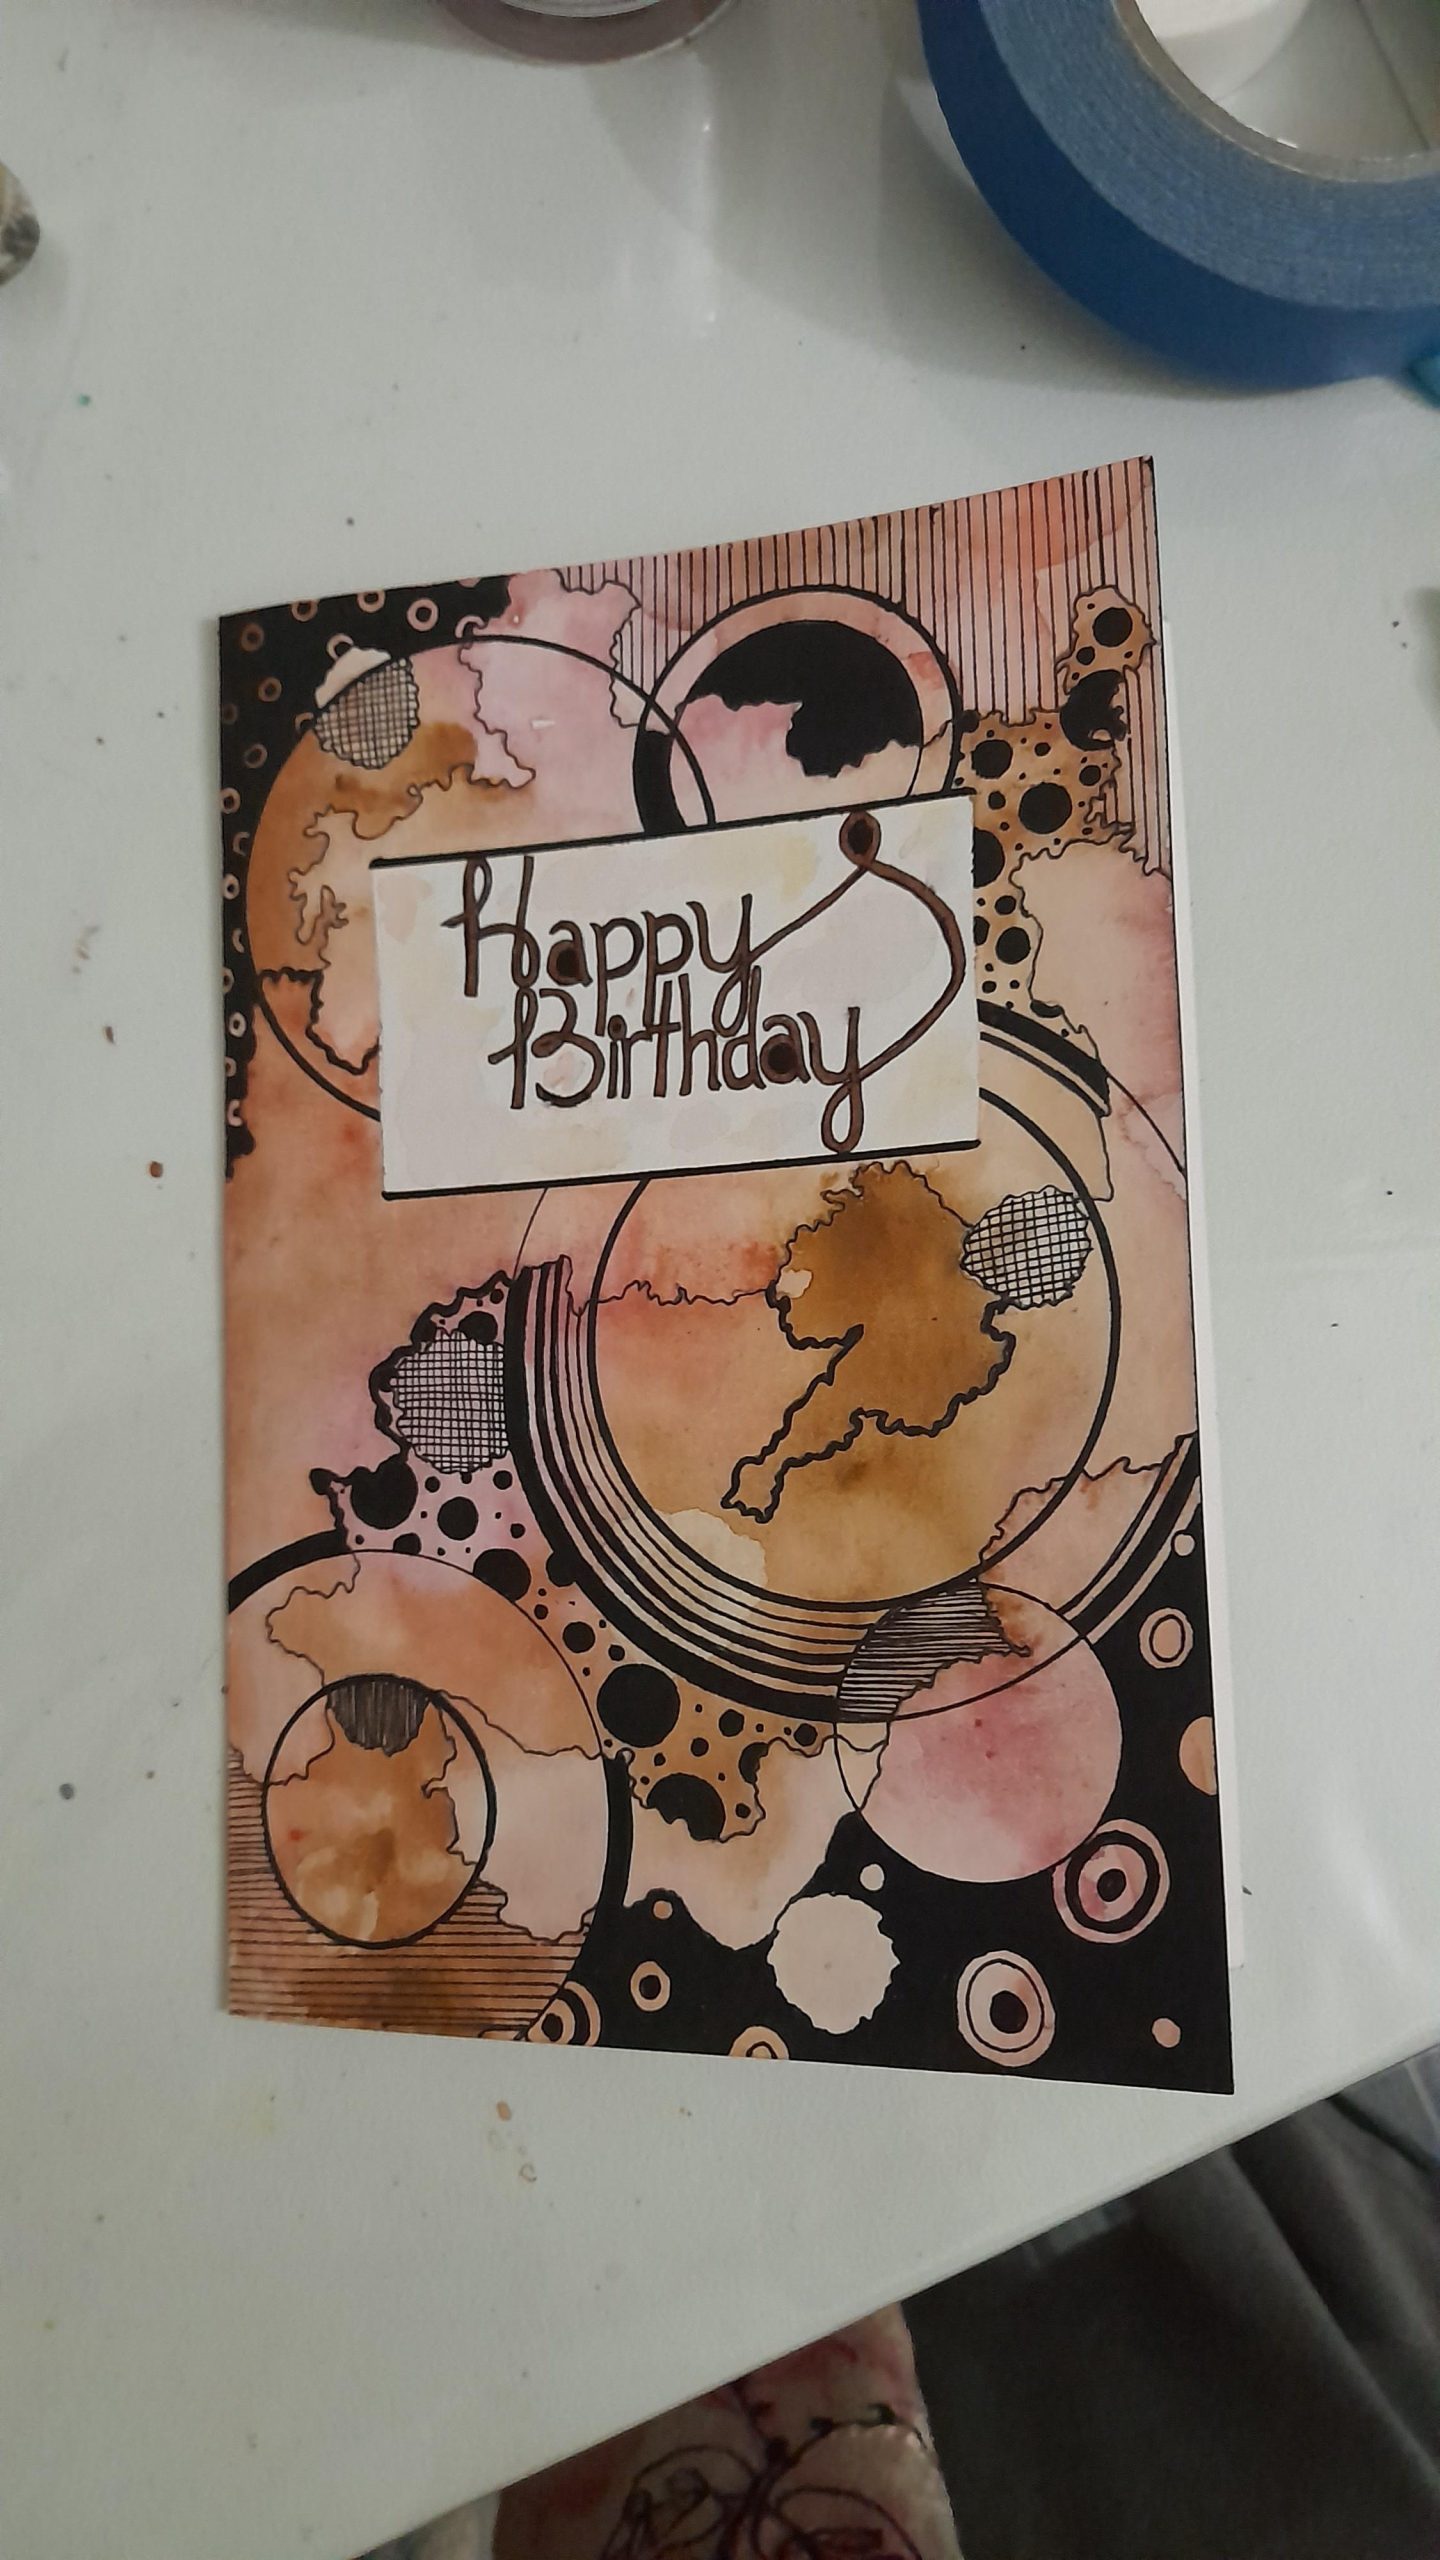 First birthday card I’ve made in years!